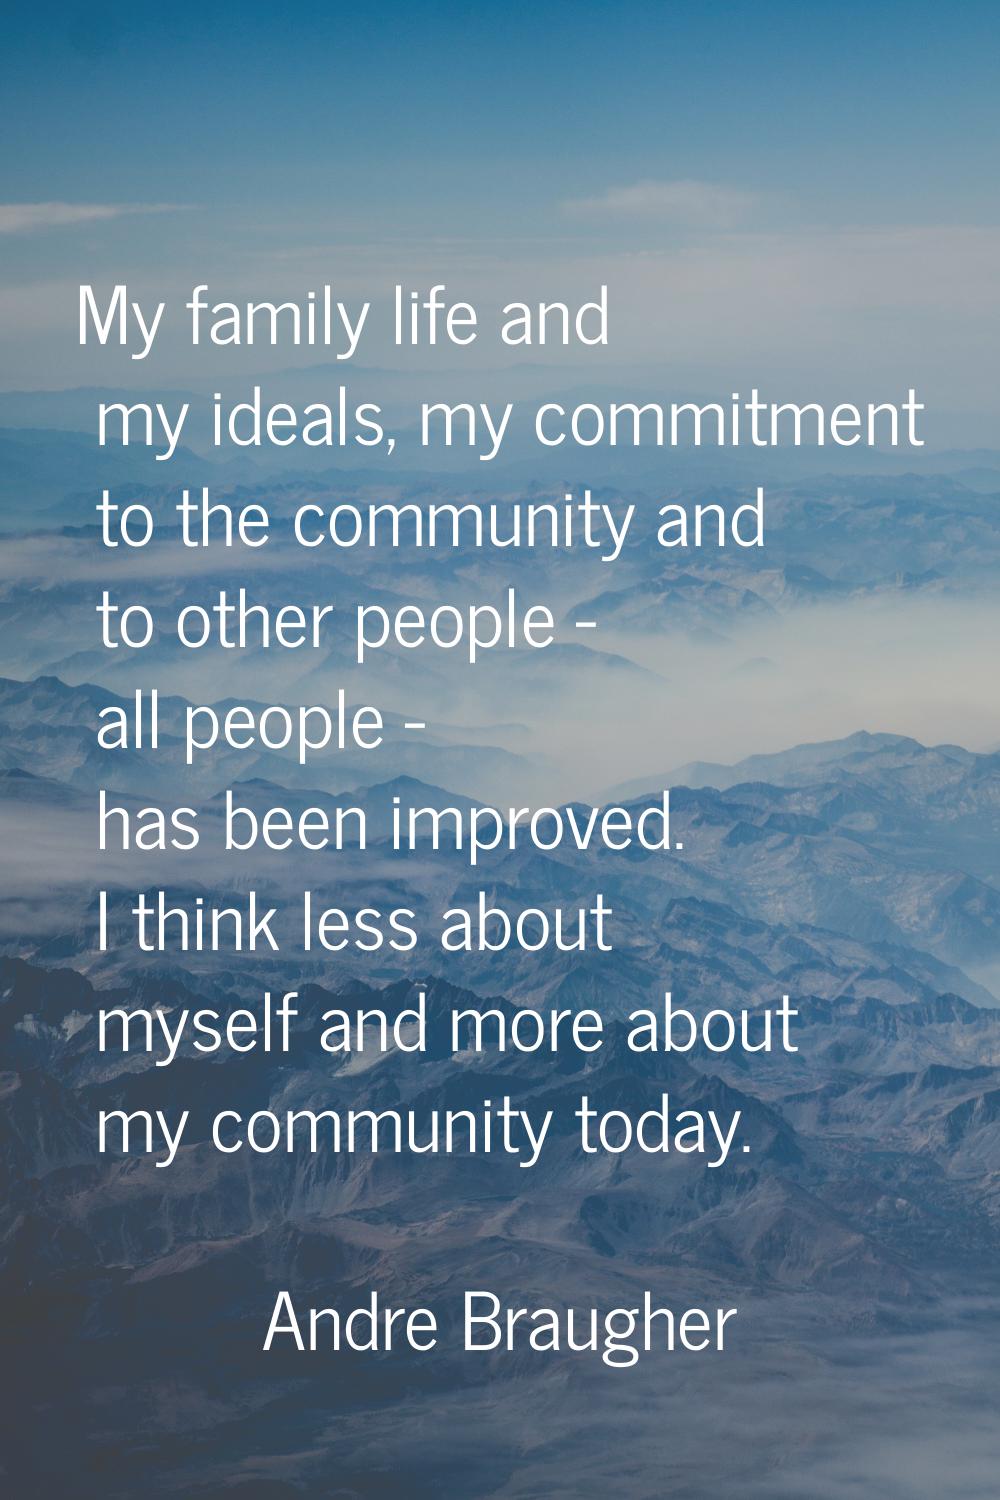 My family life and my ideals, my commitment to the community and to other people - all people - has